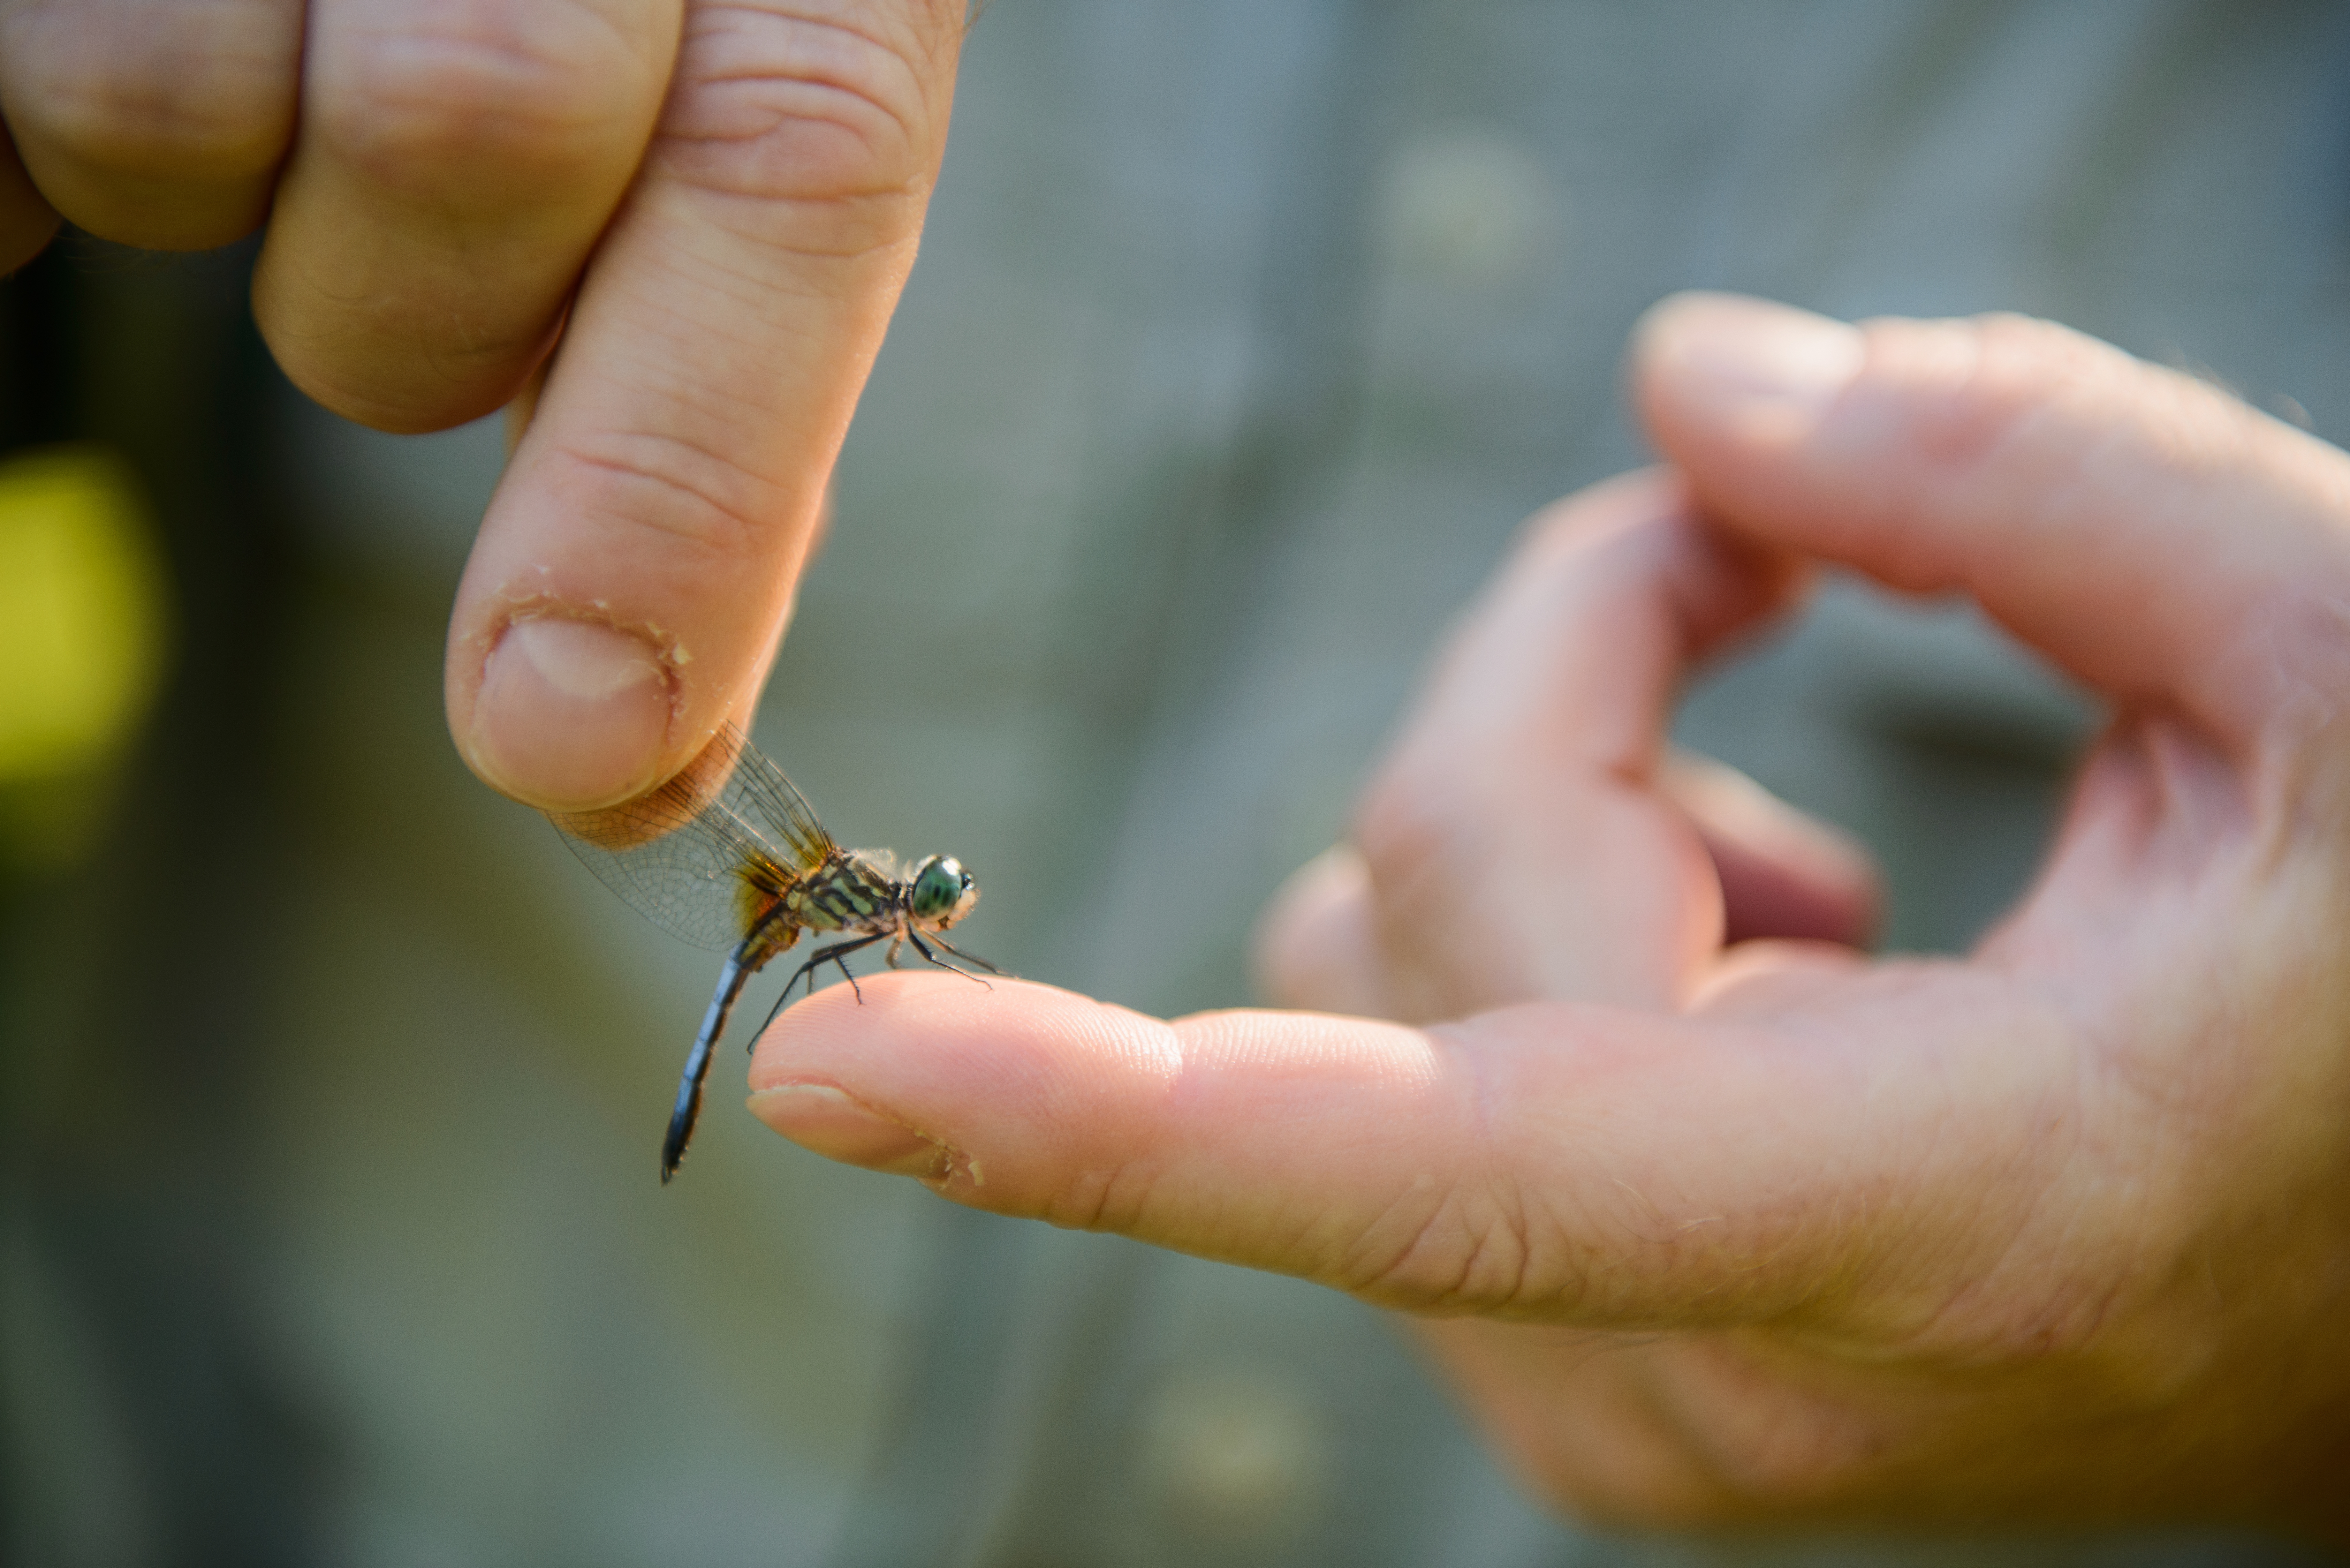 A dragonfly is held on the finger of a human hand.